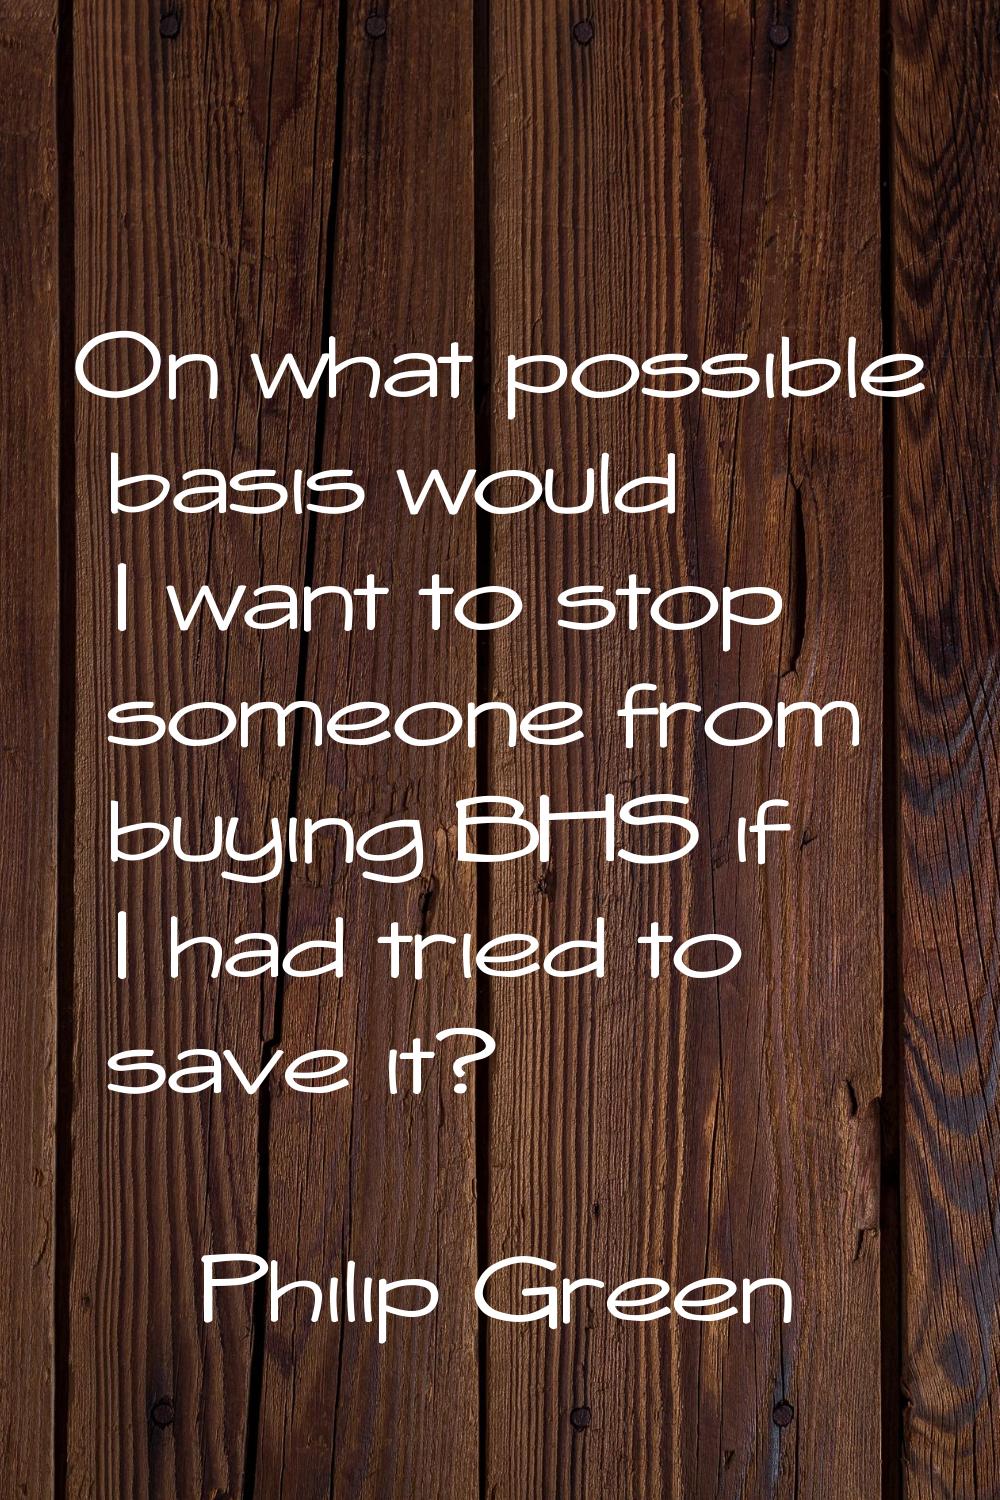 On what possible basis would I want to stop someone from buying BHS if I had tried to save it?